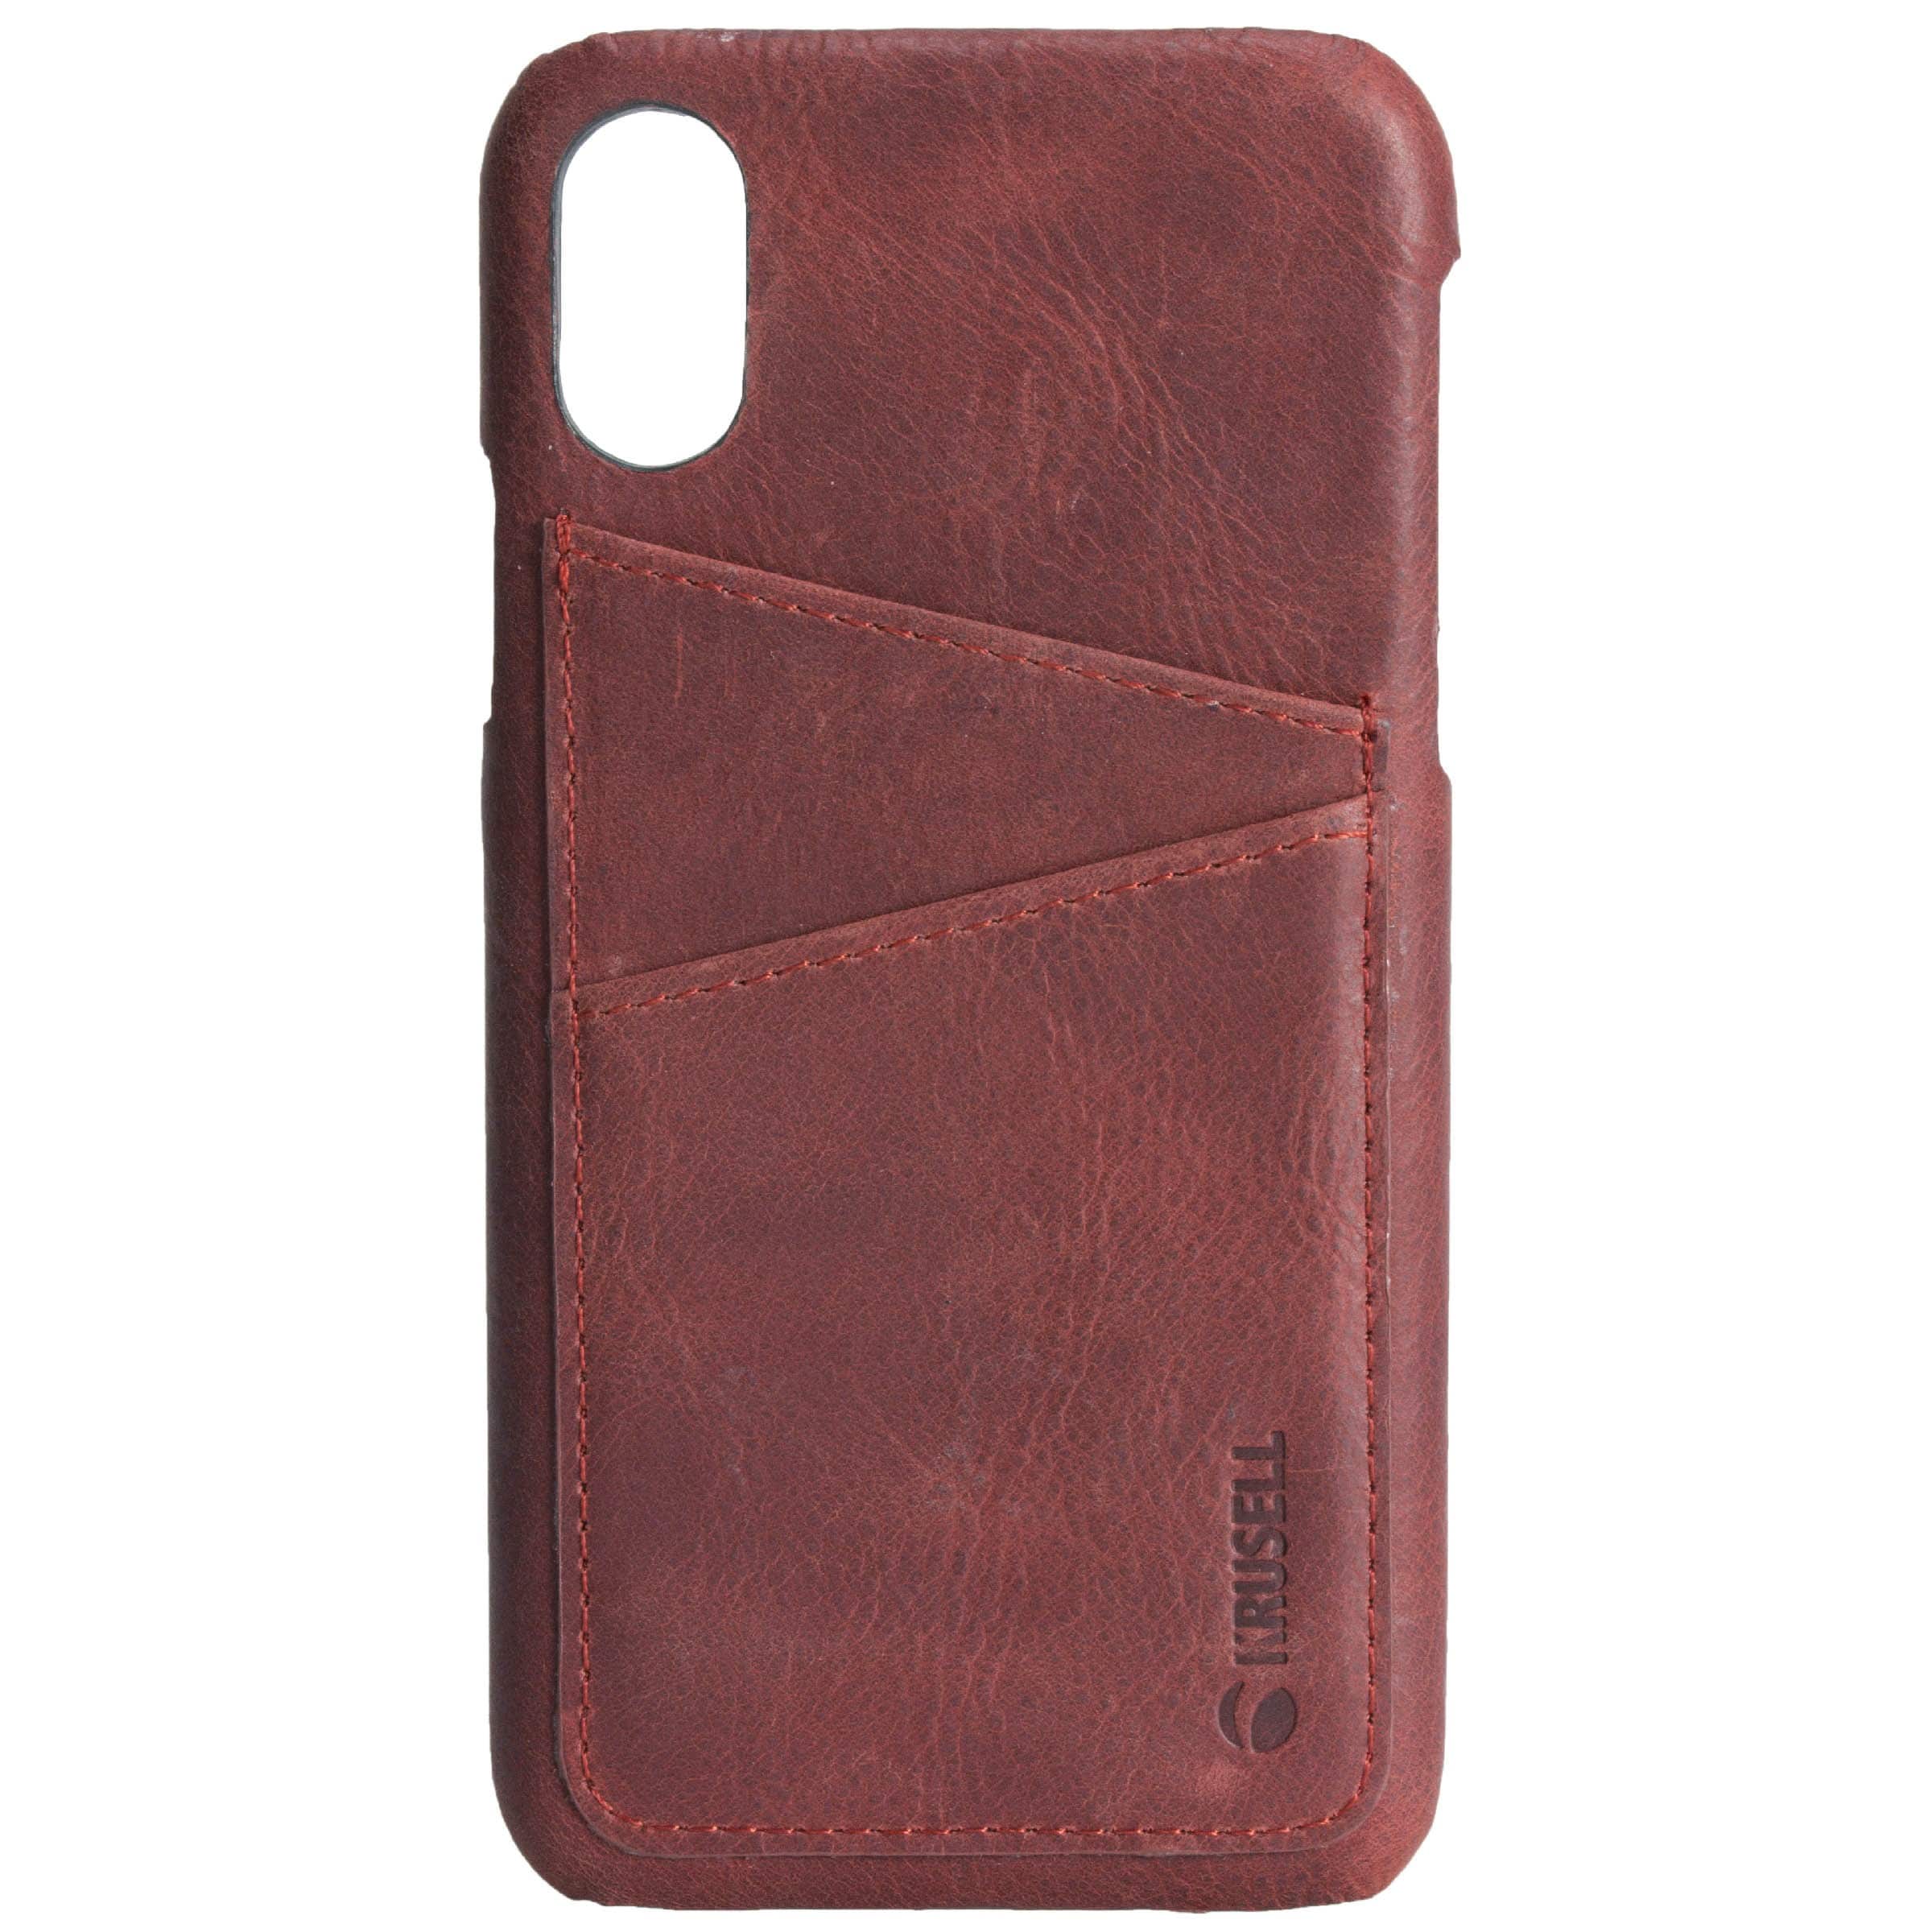 Krusell Sunne 2 Card Cover iPhone XR - Vintage Red